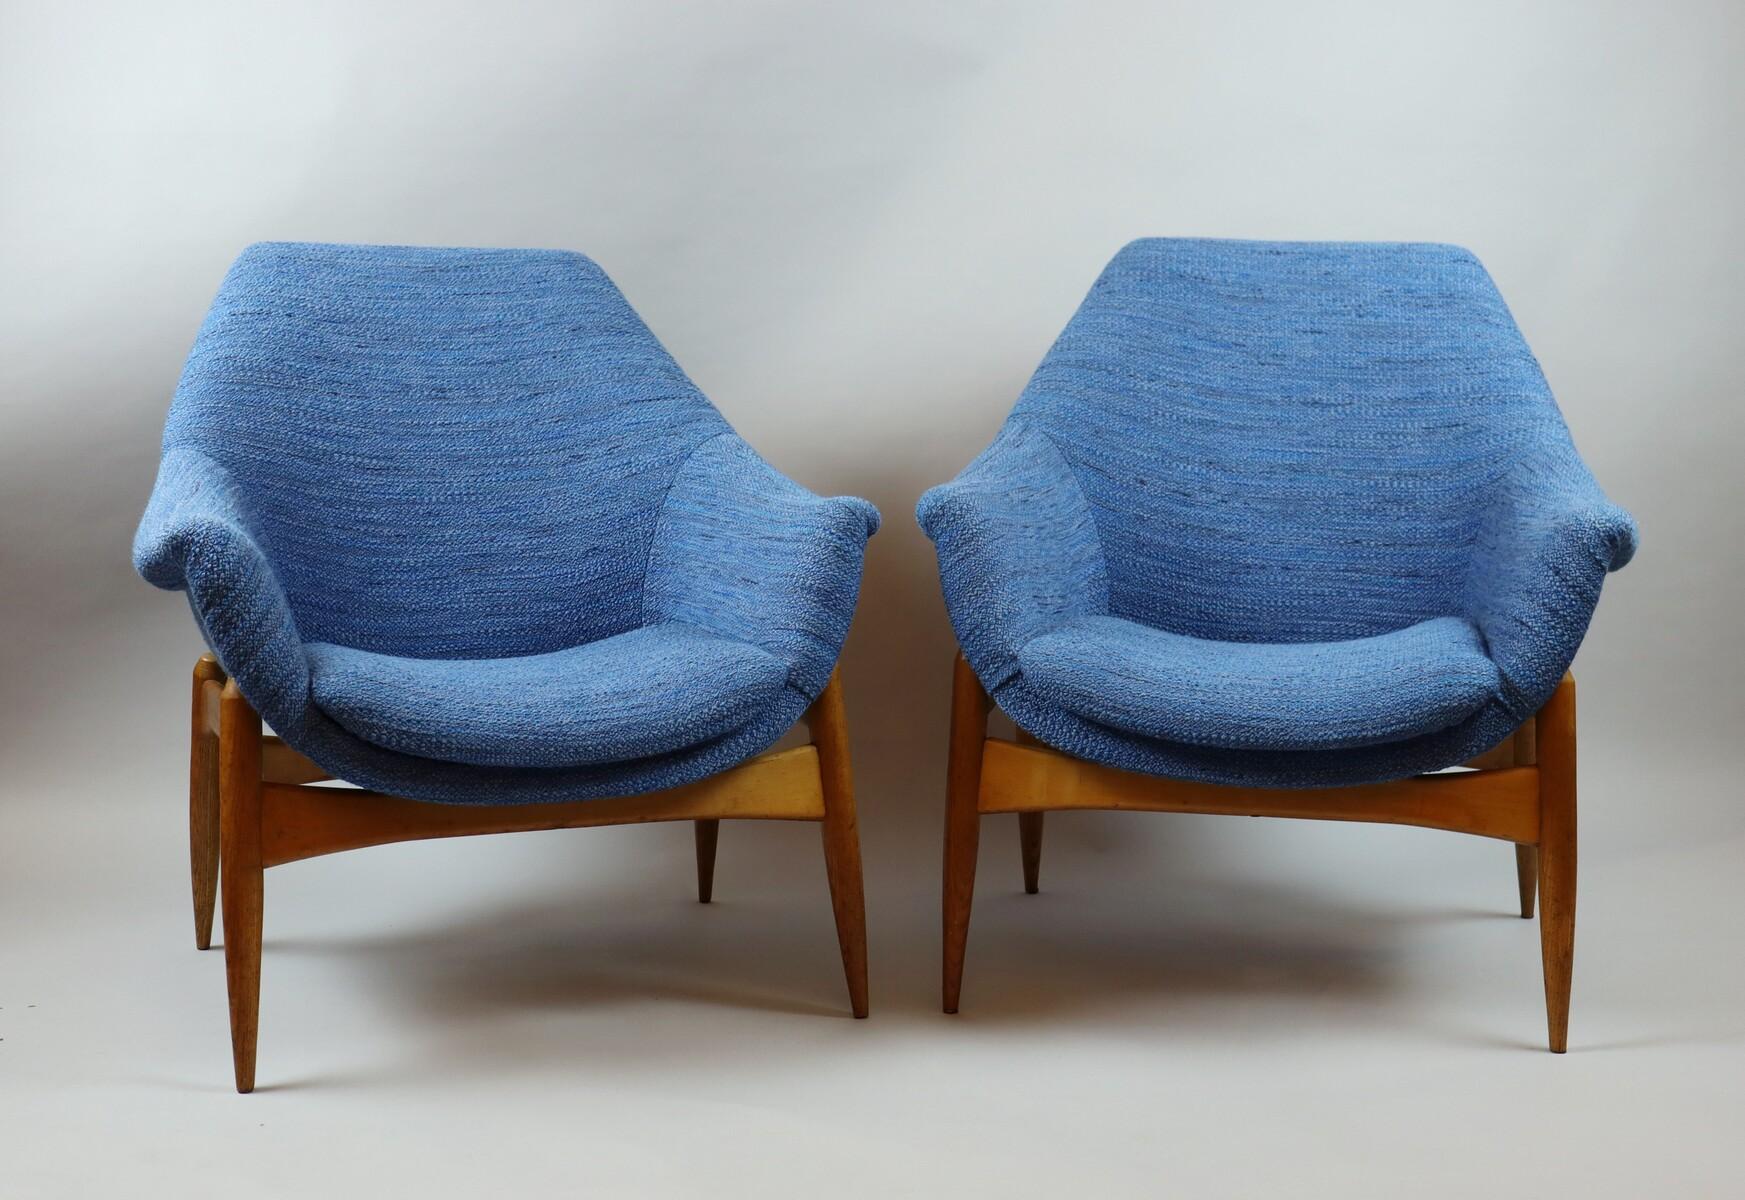 Mid-Century Pair of Blue Fabric Armchairs by Julia Gaubek, Hungary, 1950s.